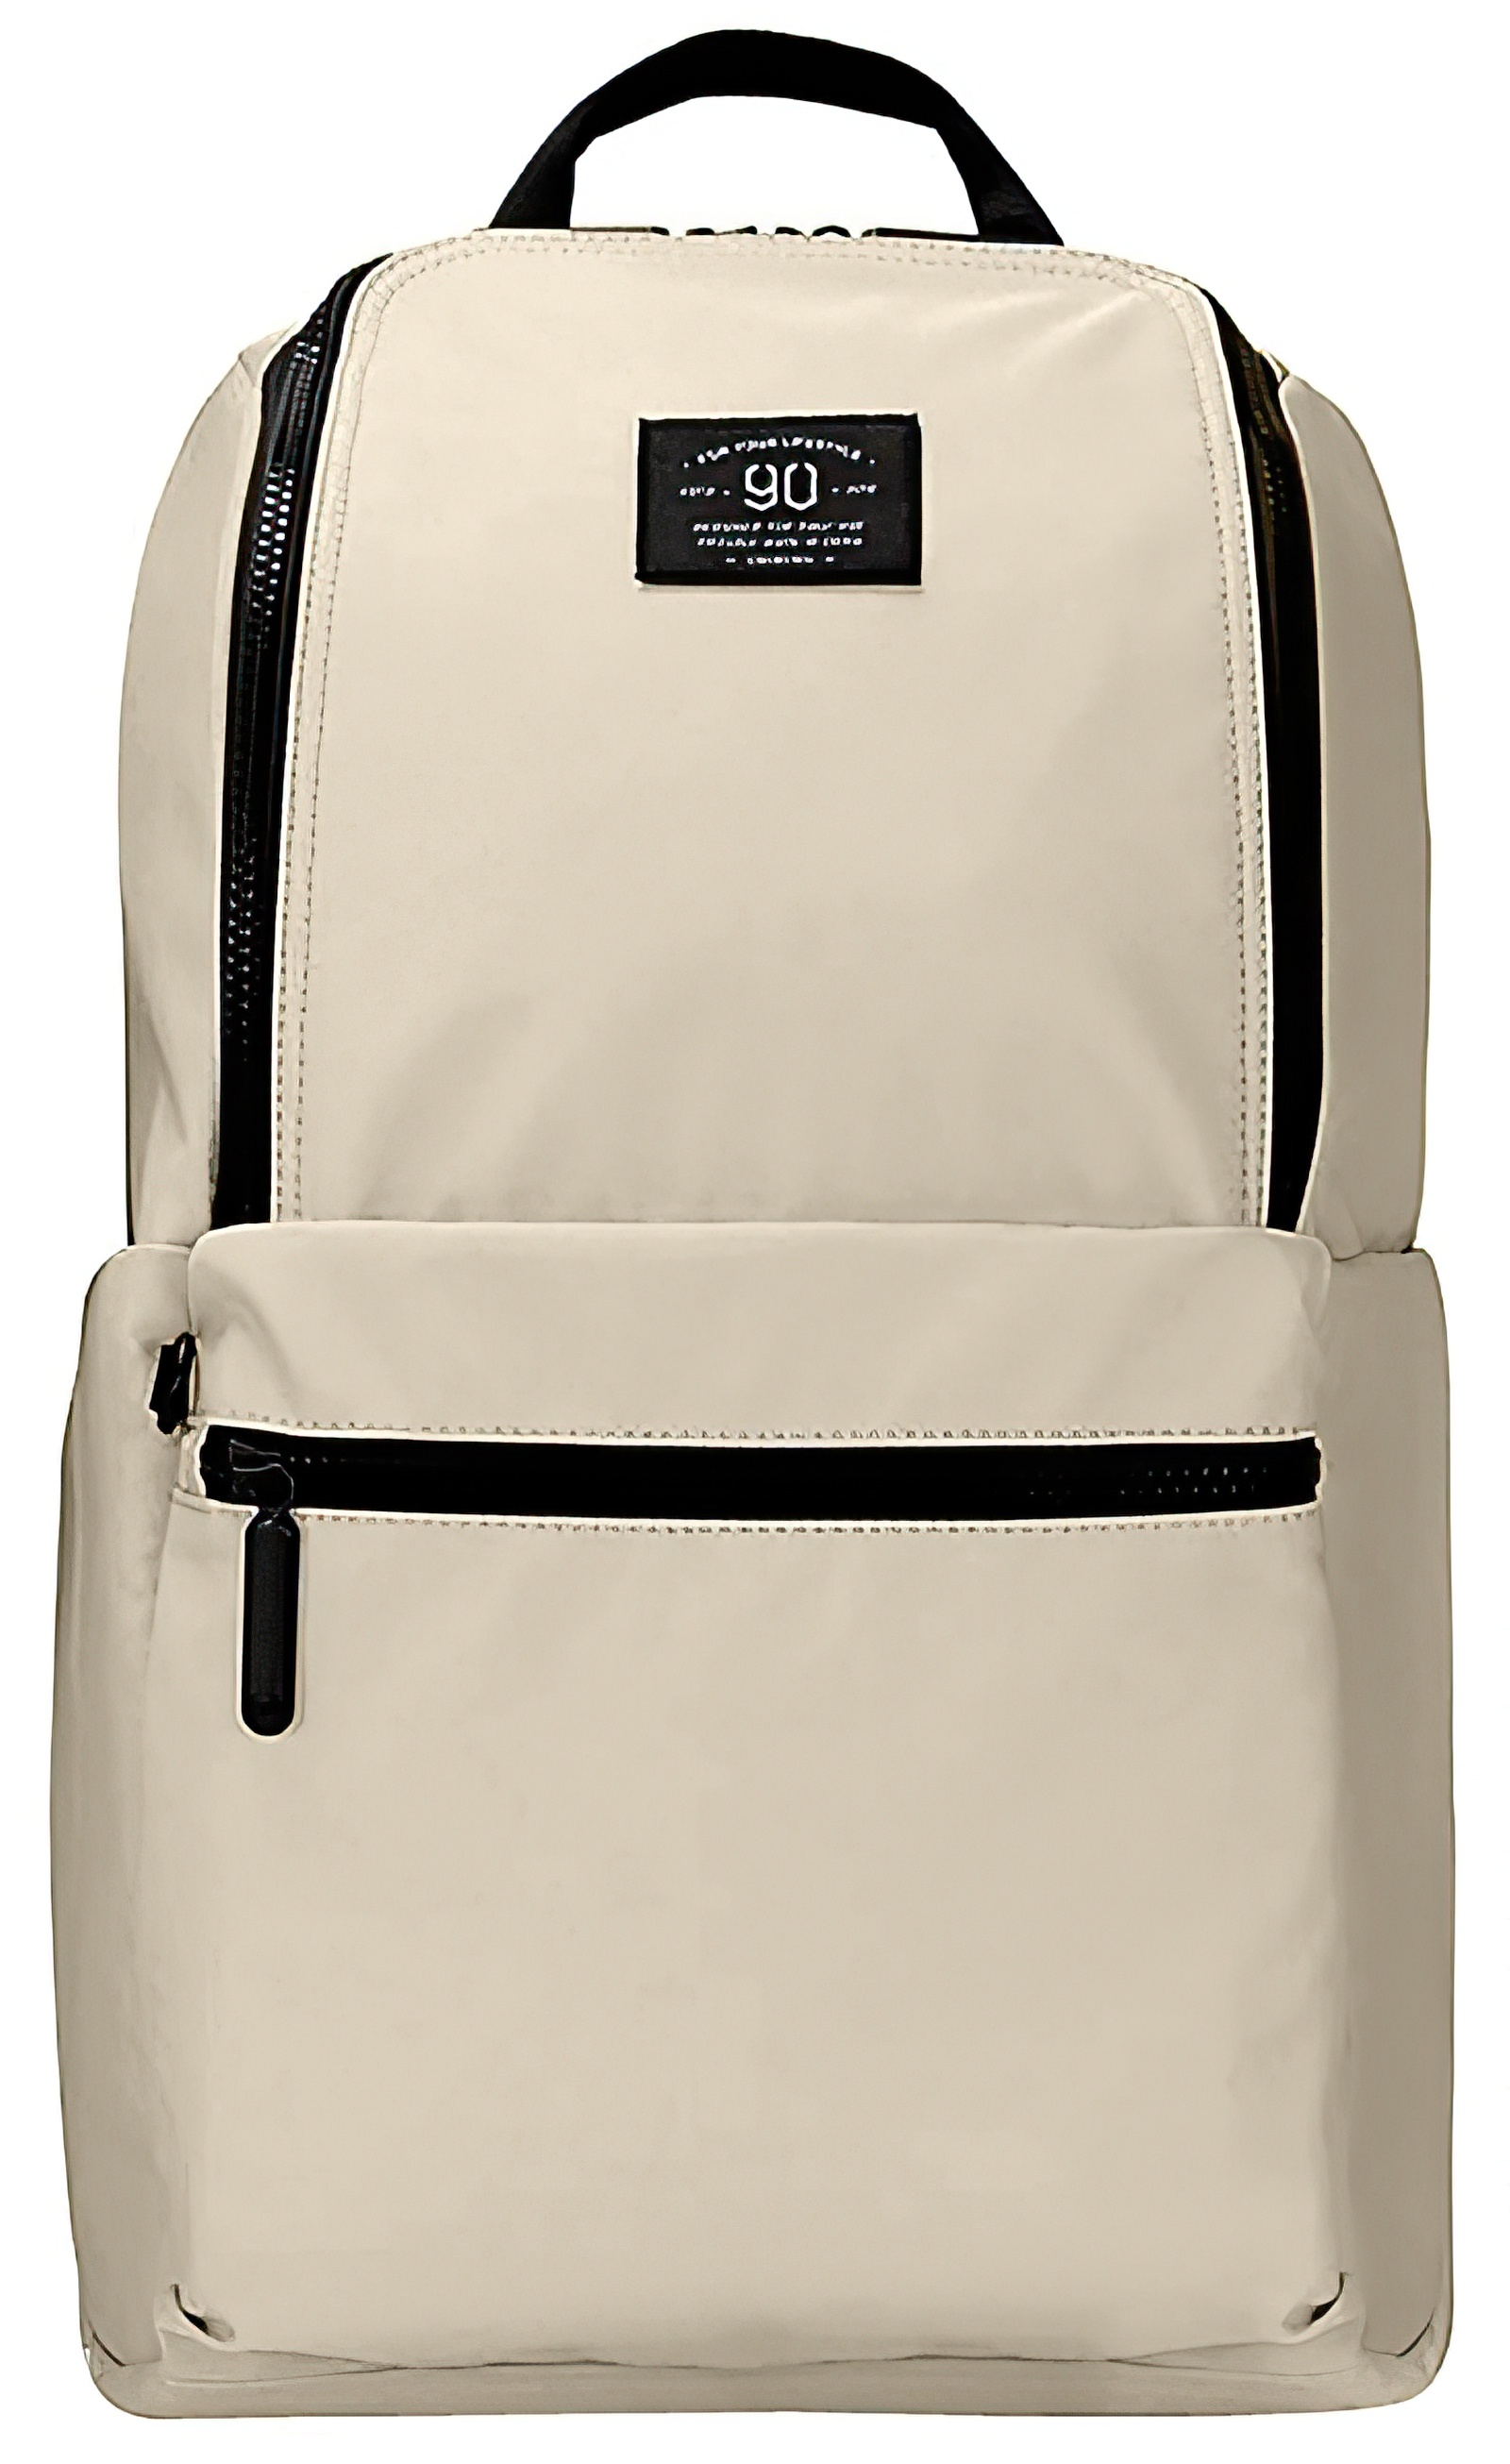 Xiaomi 90 Points Pro Leisure Travel Backpack 18L Beige КАРКАМ